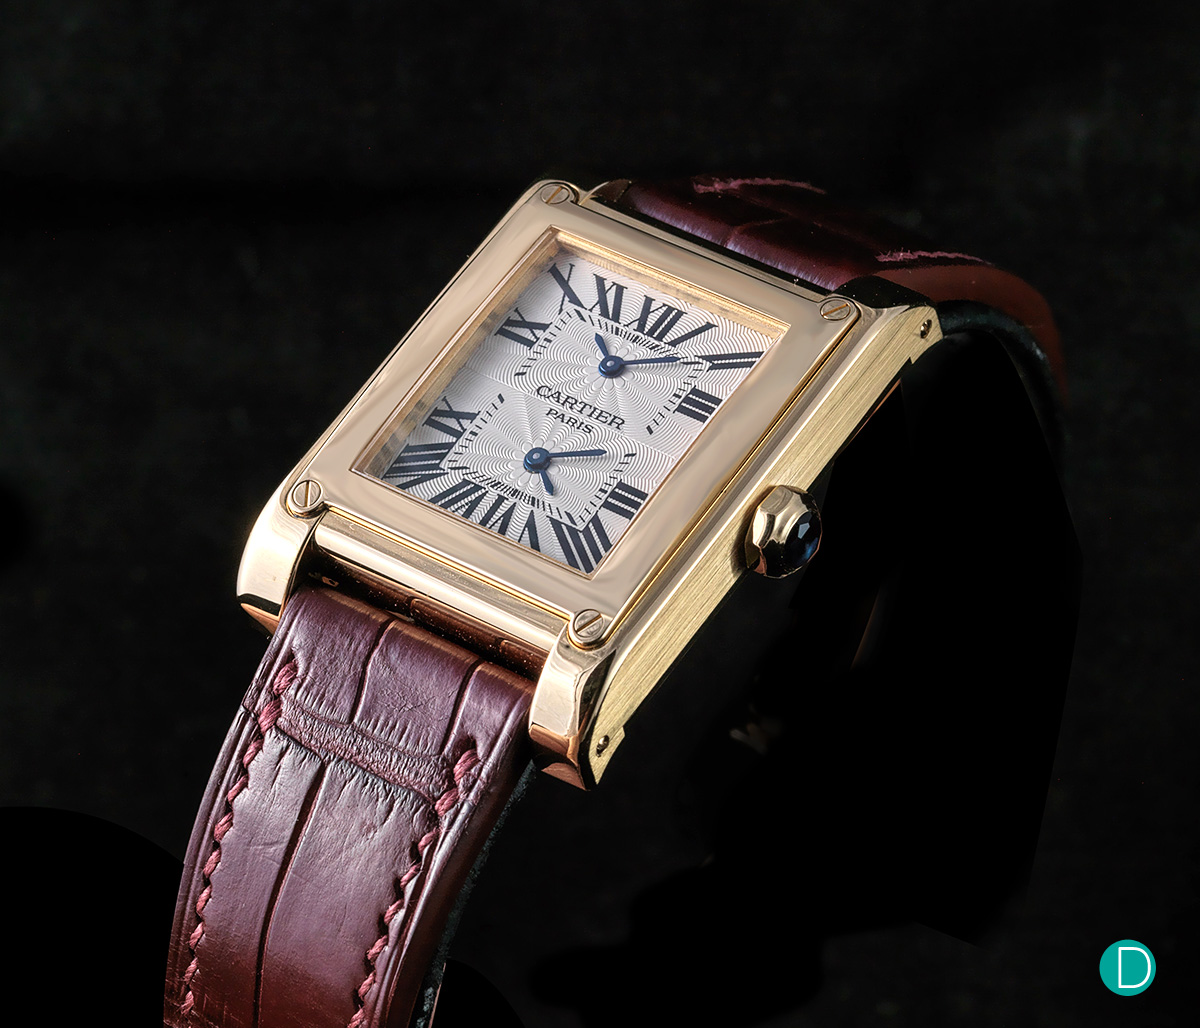 Cartier Tank à Vis and Santos Galbee: why I bought both!